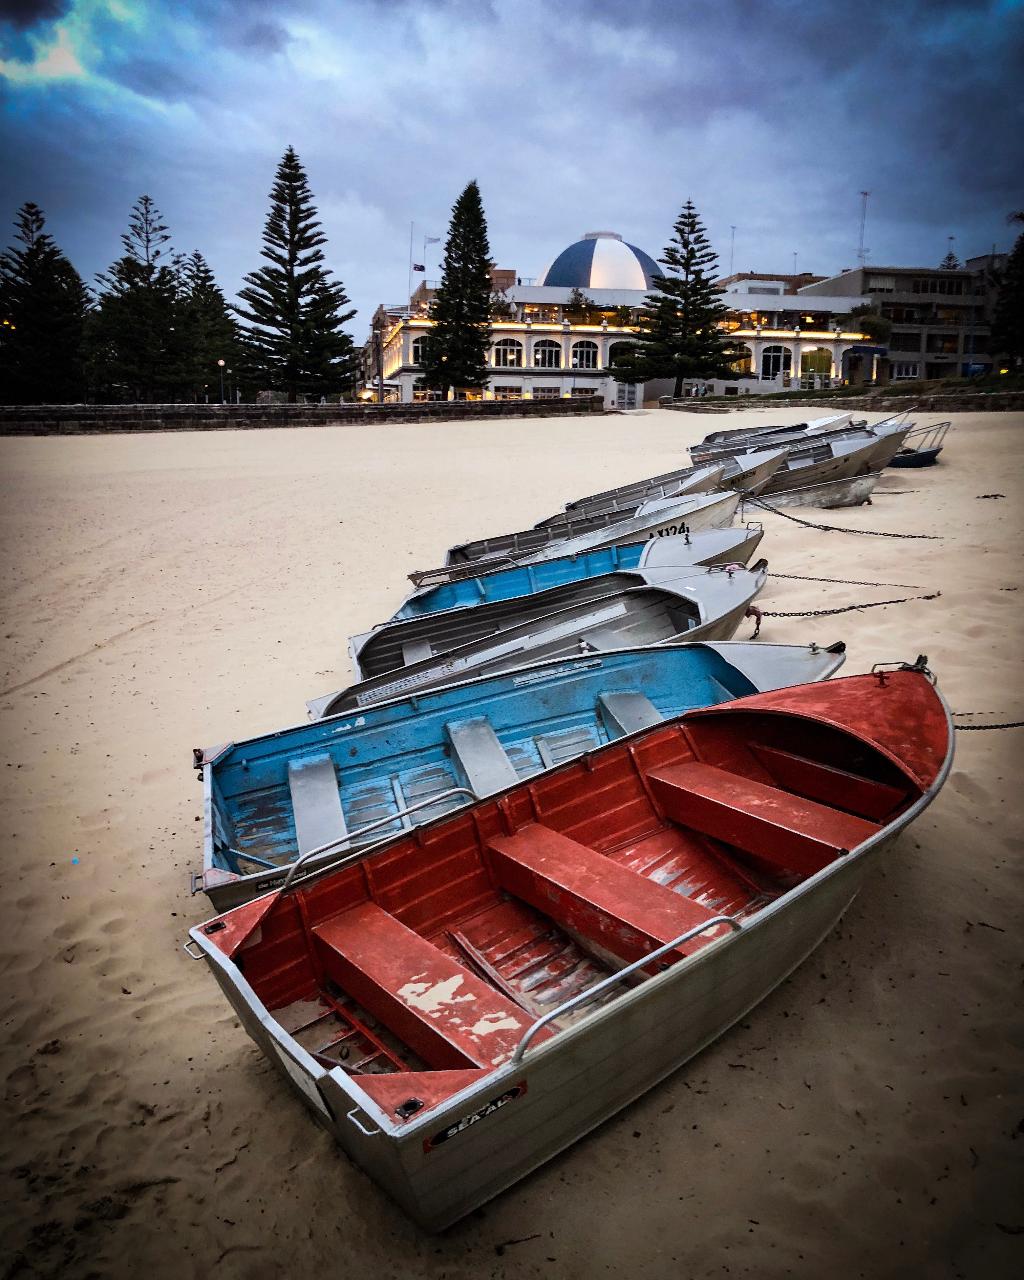 Phone photography - Sydney Coogee beach Playing with Time (Members)